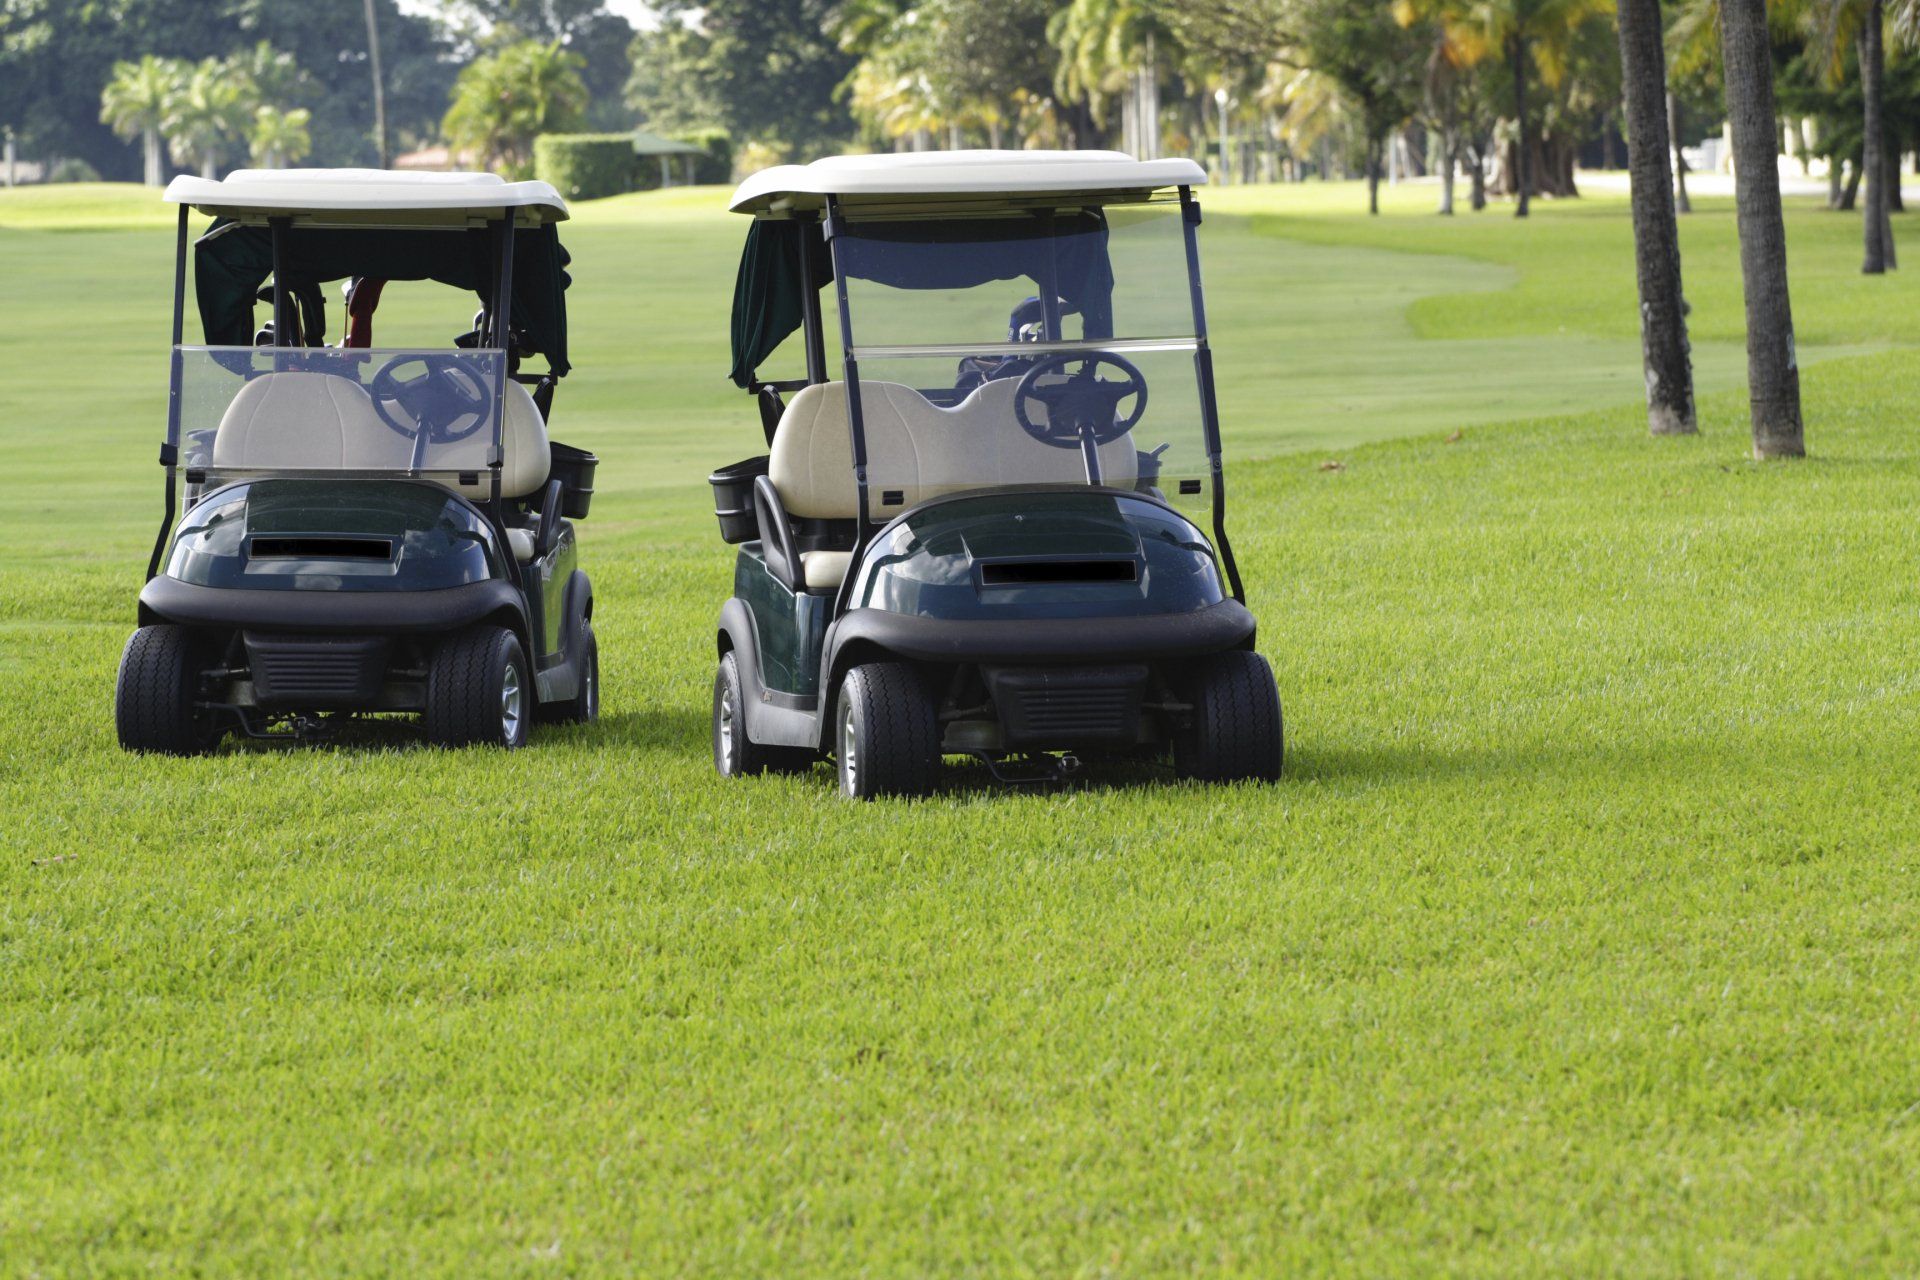 Two golf carts are parked in the grass on a golf course